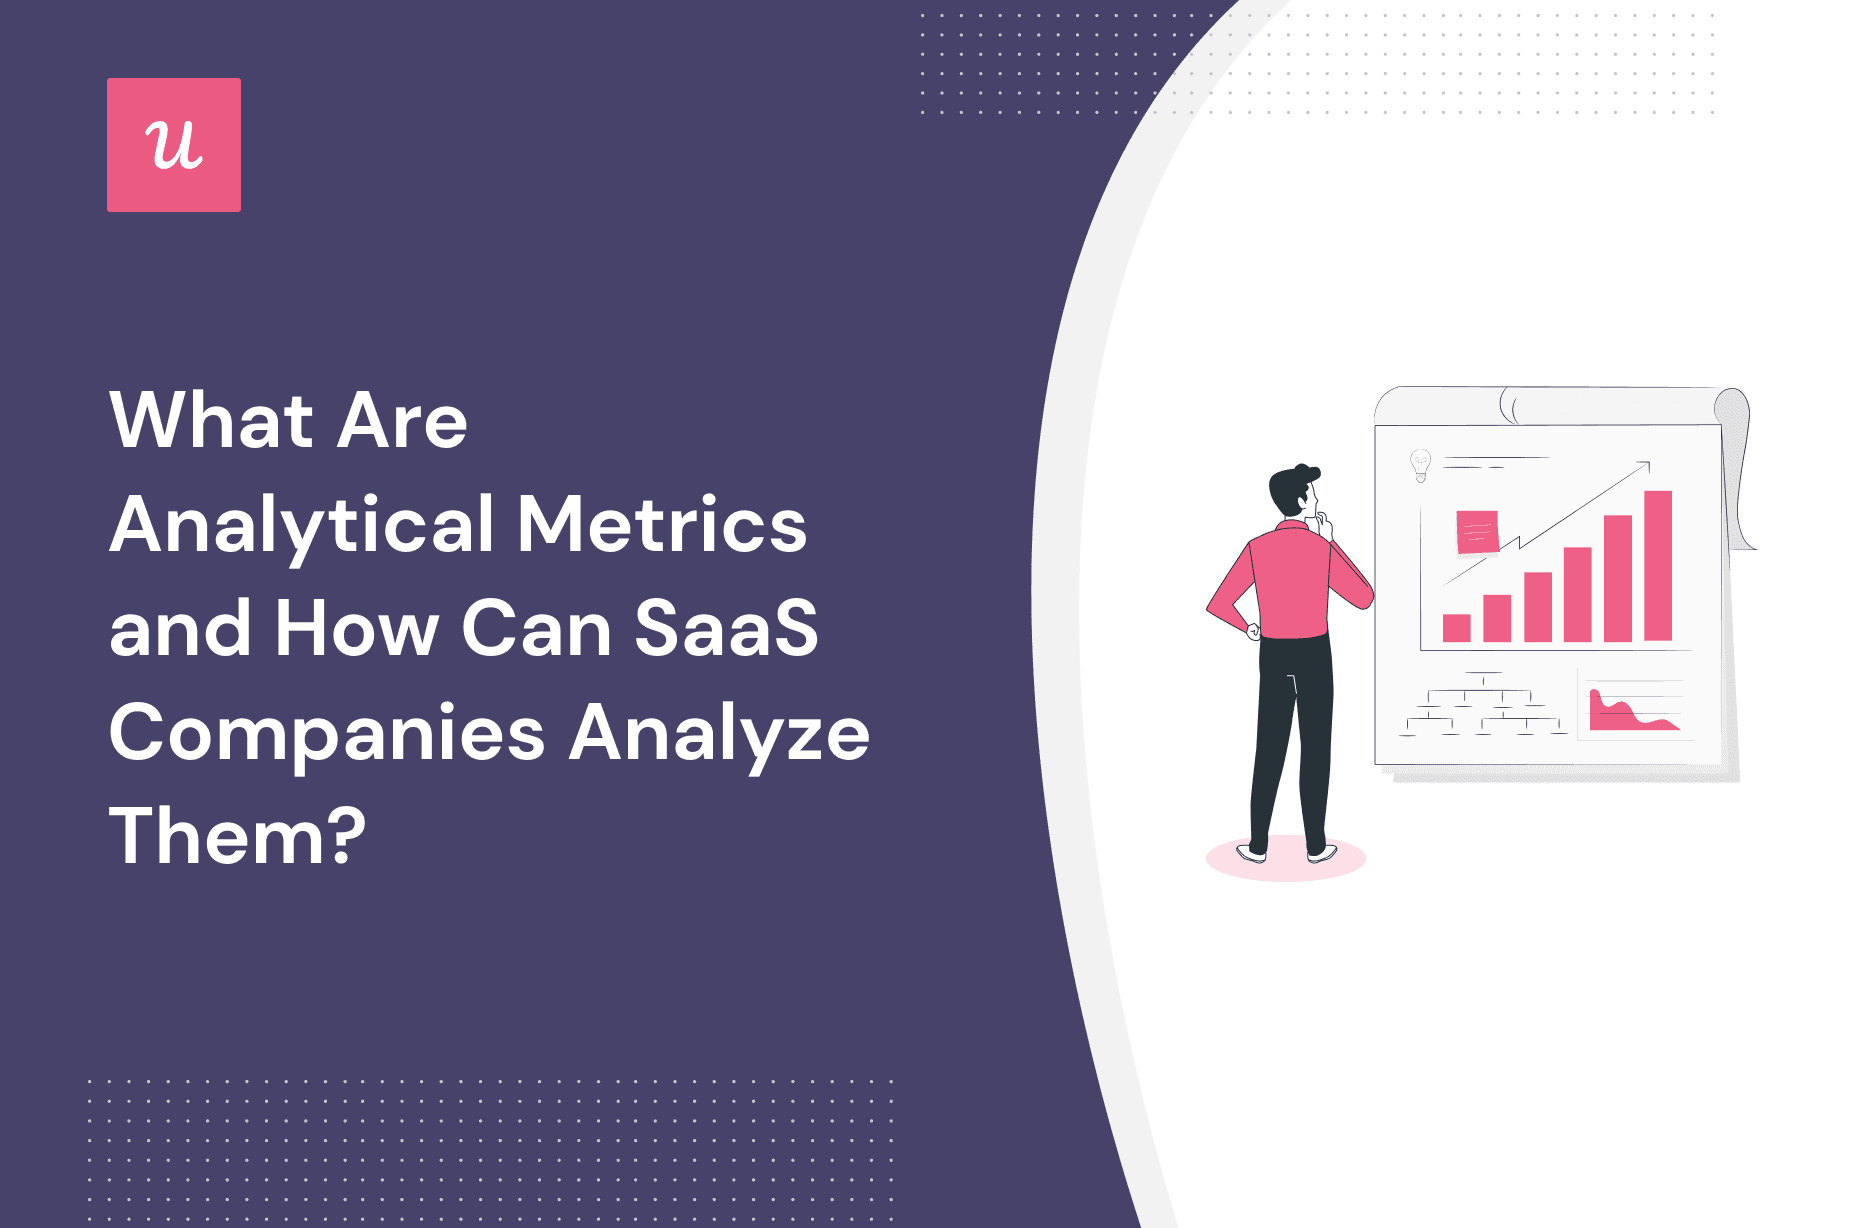 What Are Analytical Metrics and How Can SaaS Companies Analyze Them? cover